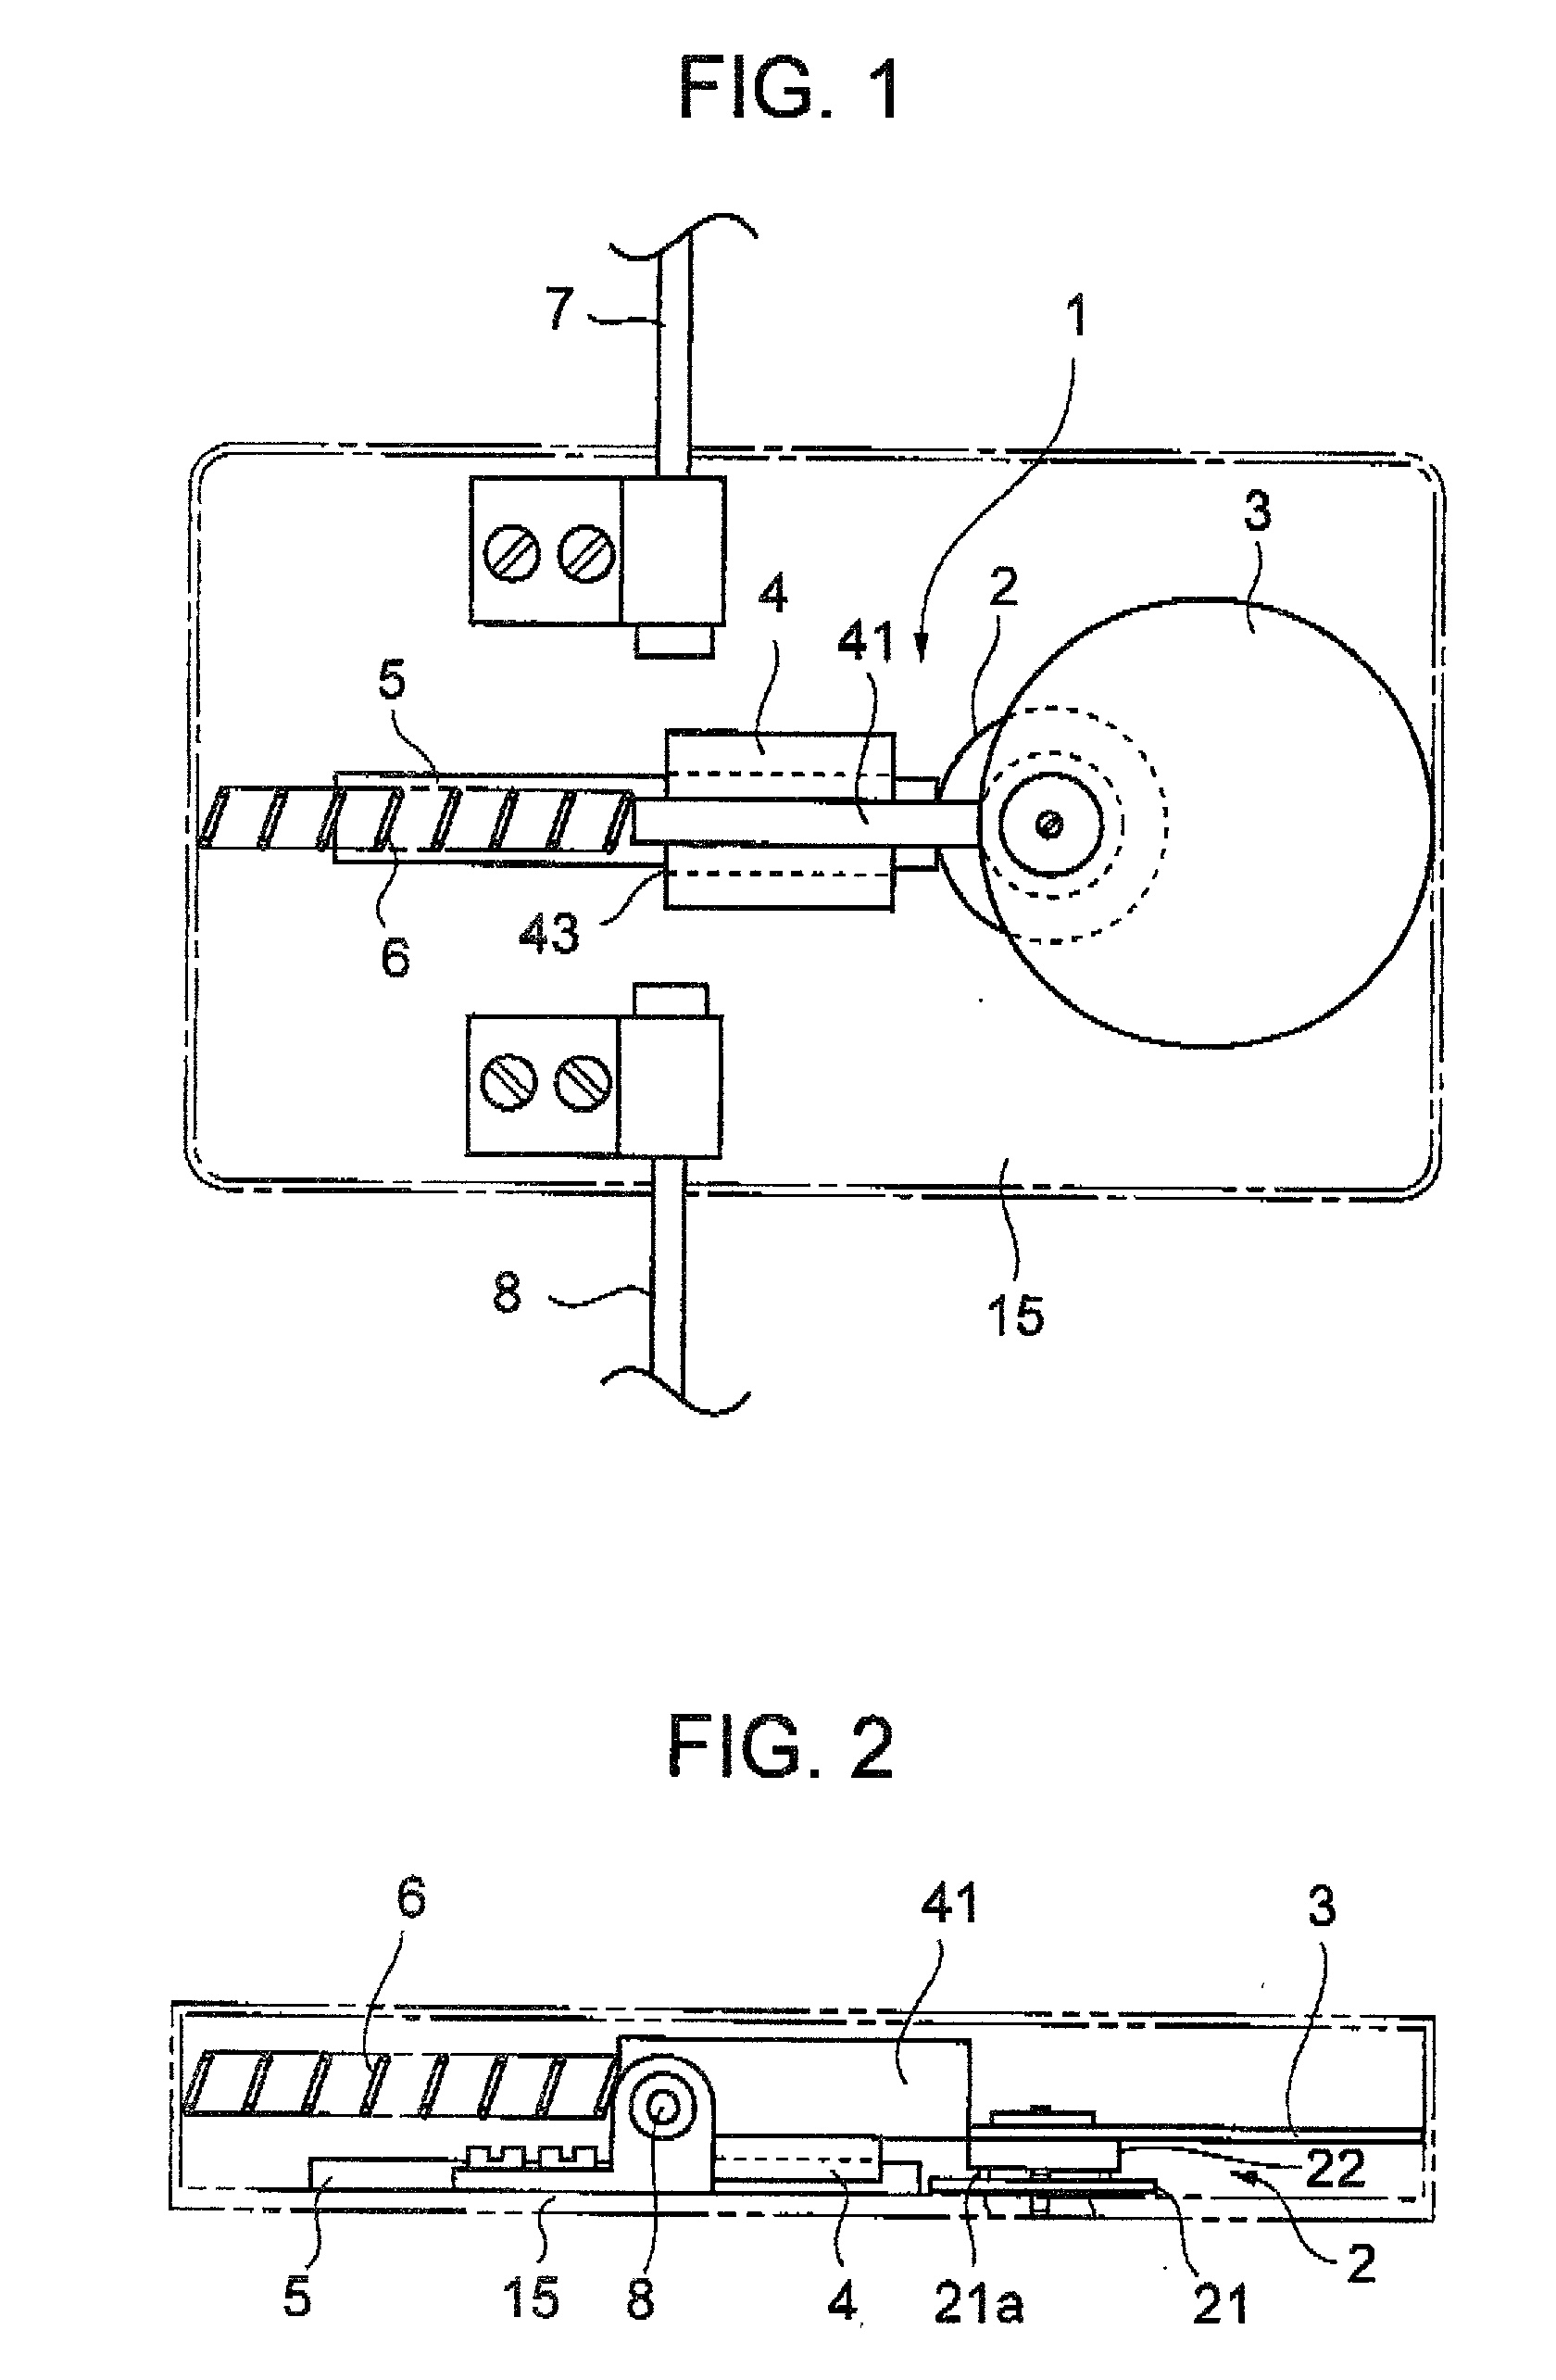 Apparatus for moving optical functioning element